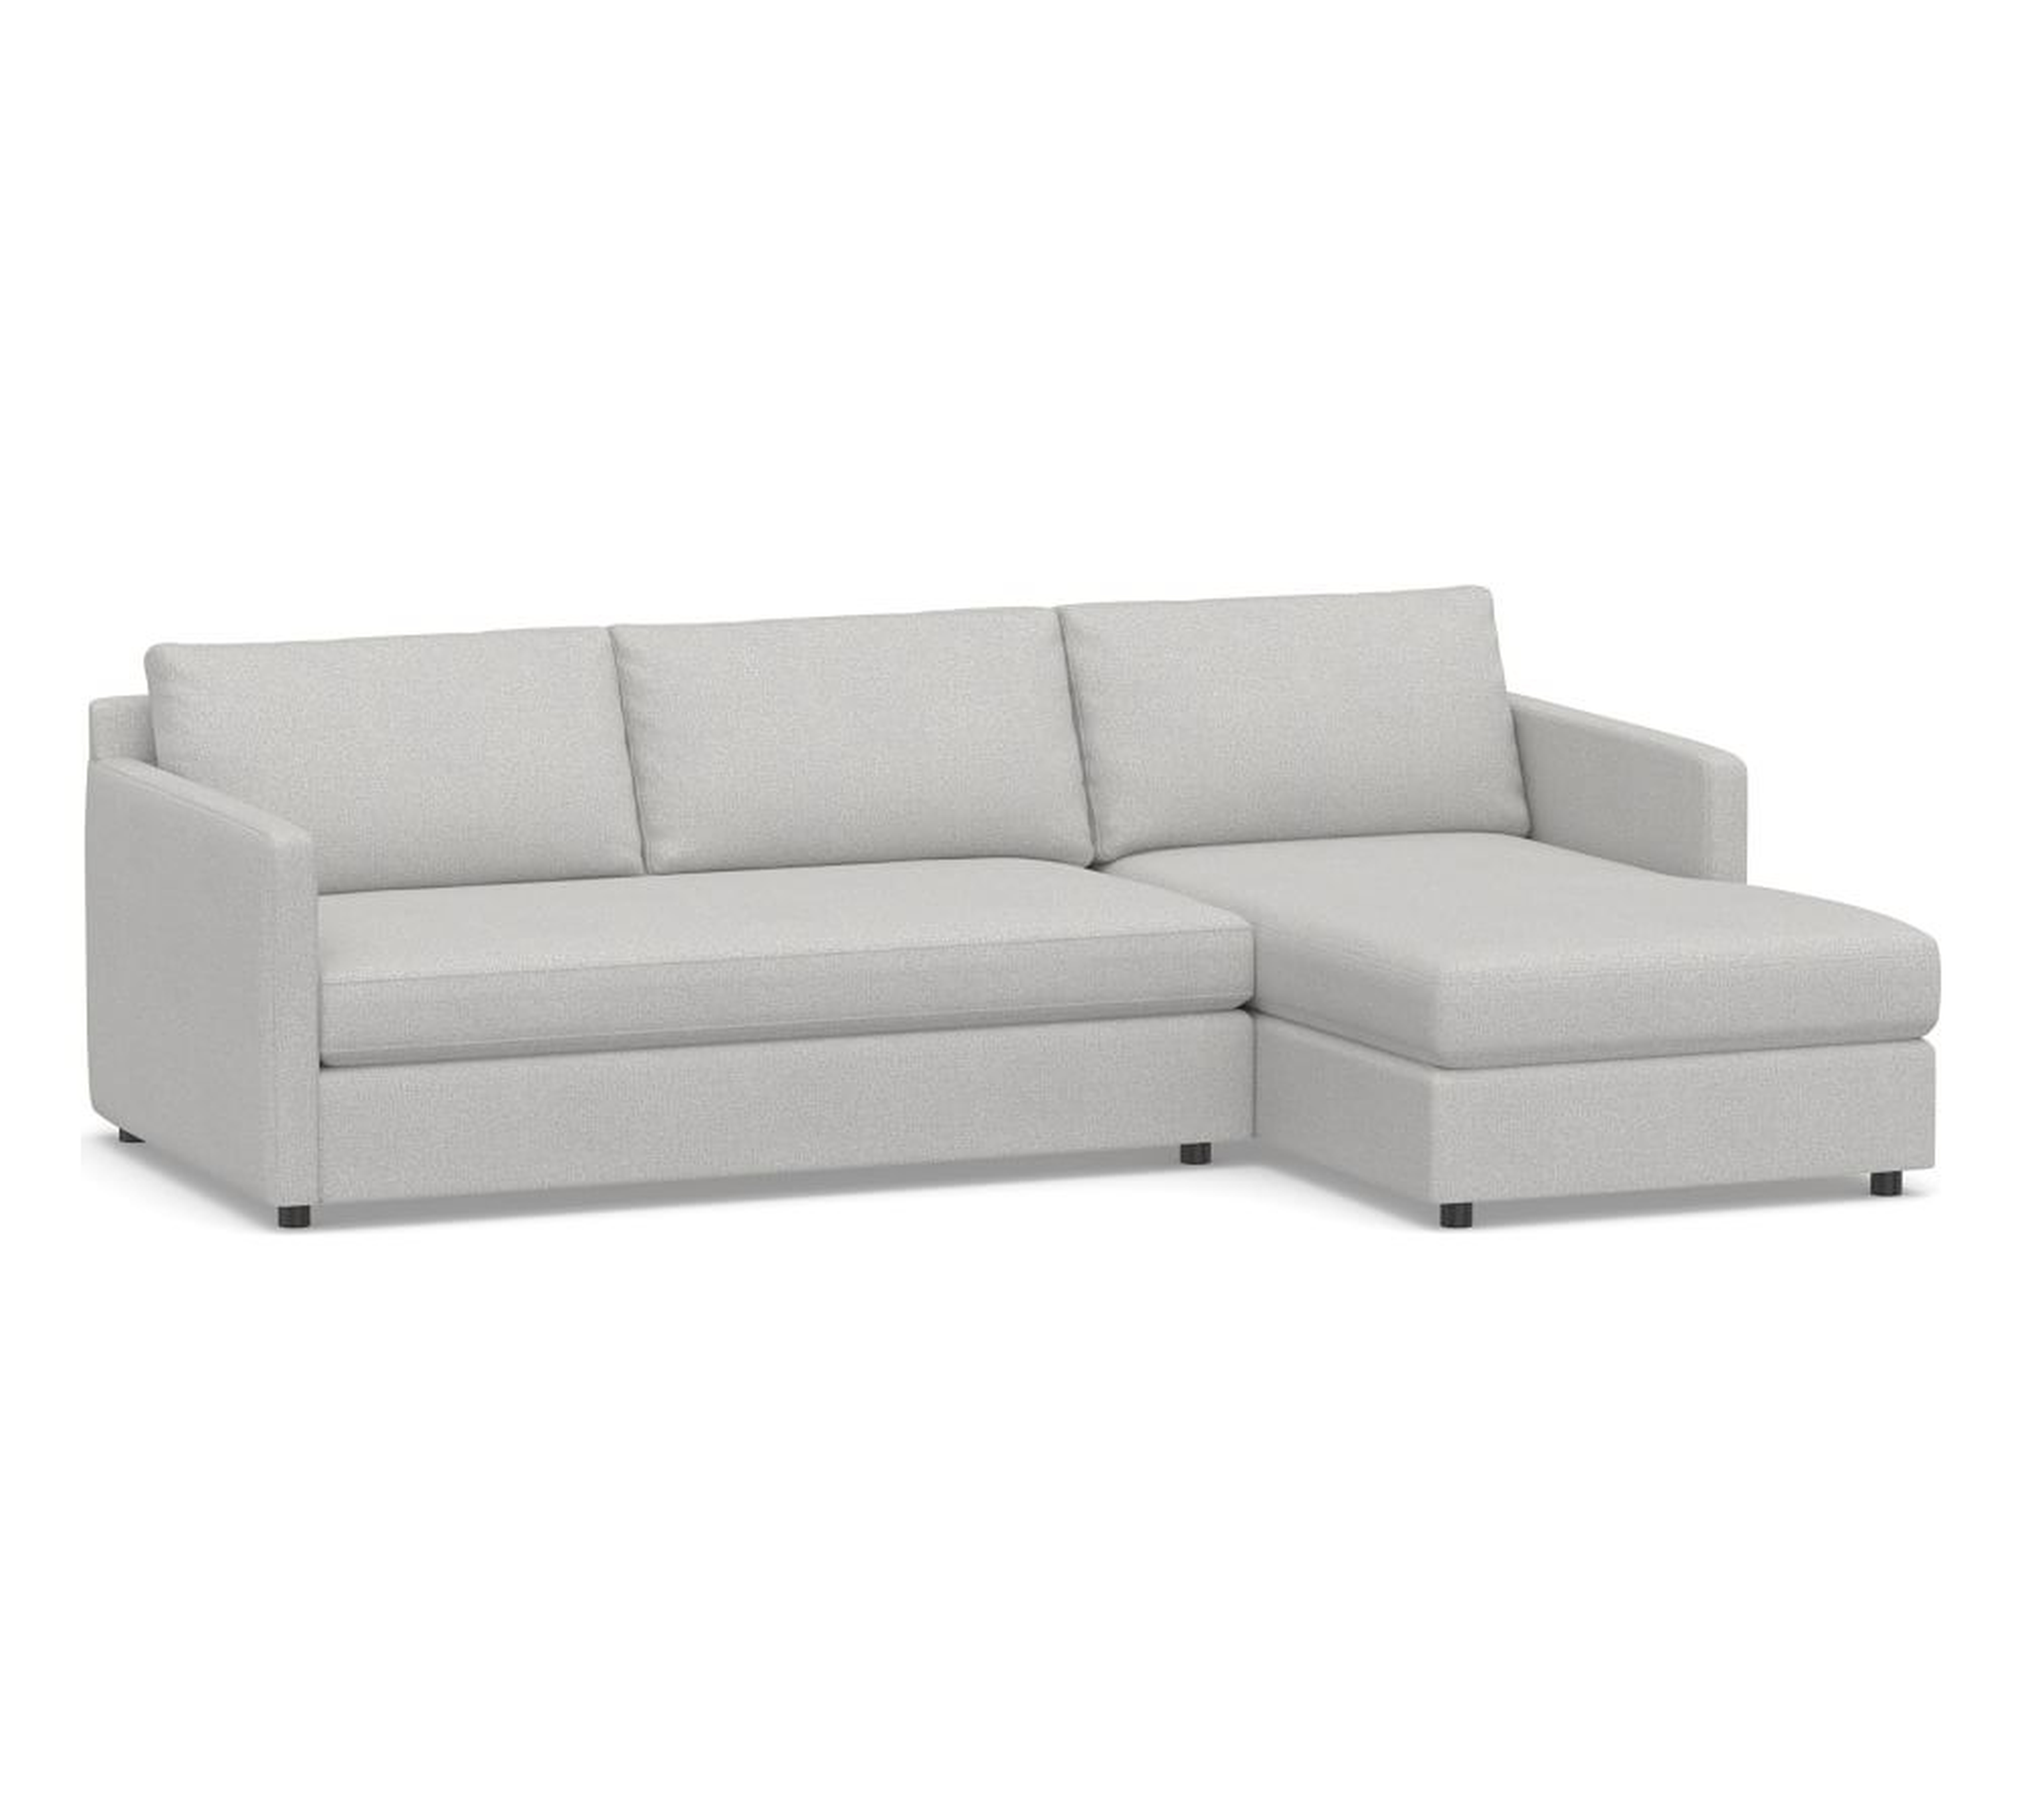 Pacifica Square Arm Upholstered Left-Arm Loveseat with Bench Cushion - Right-Arm Chaise - Pottery Barn